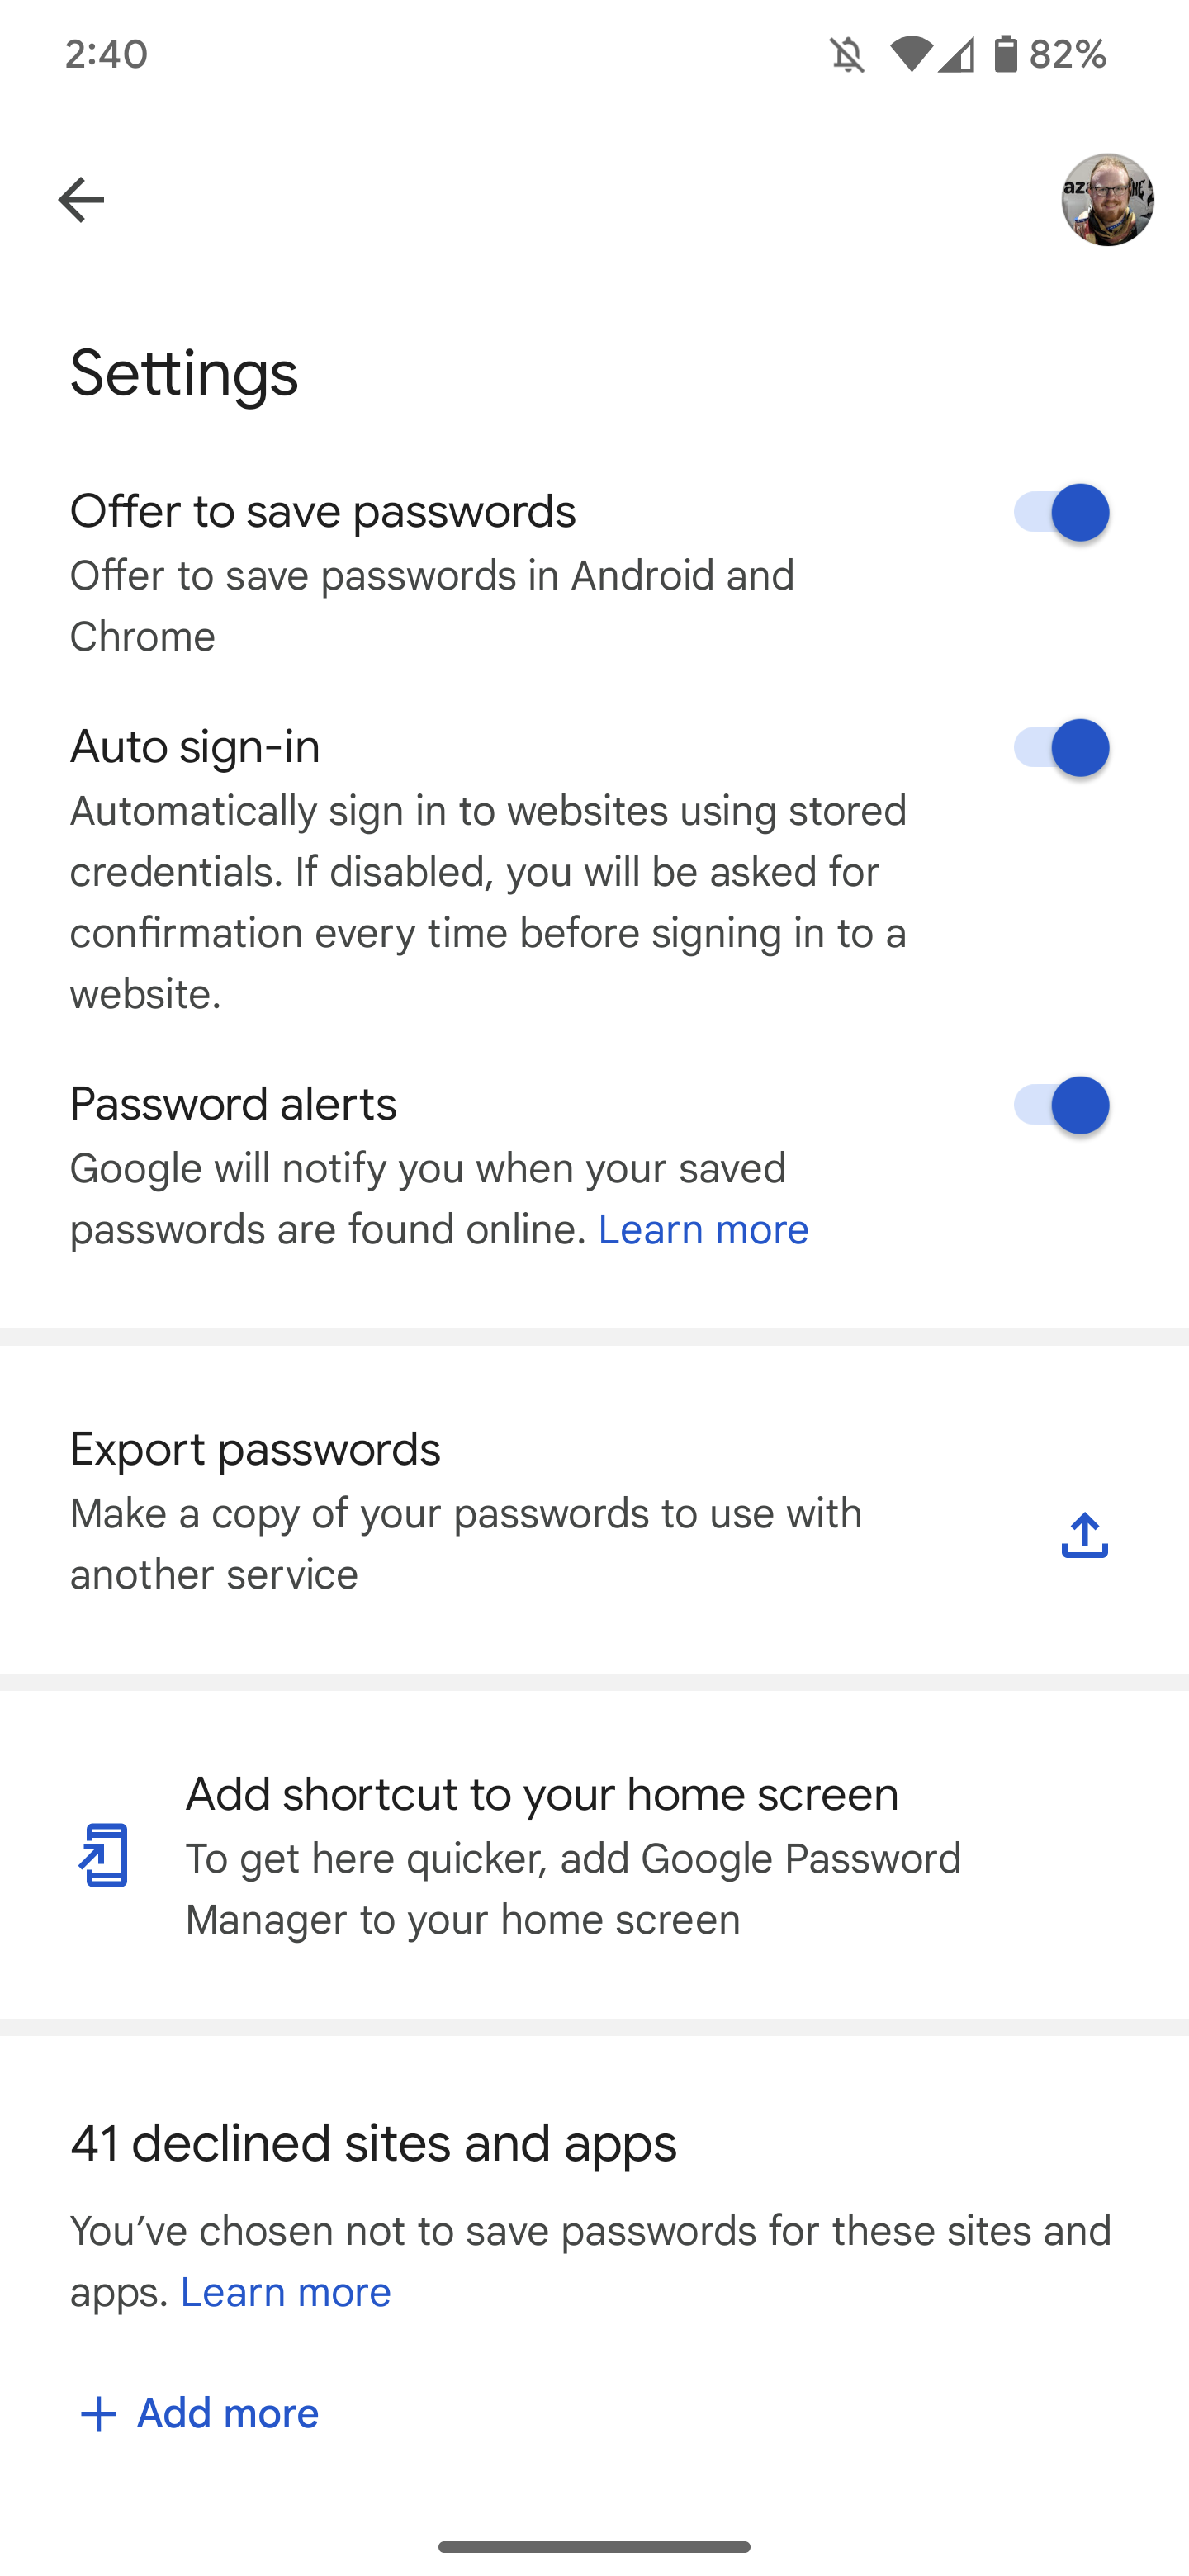 Google Password Manager settings with "Add shortcut to your home screen" option.